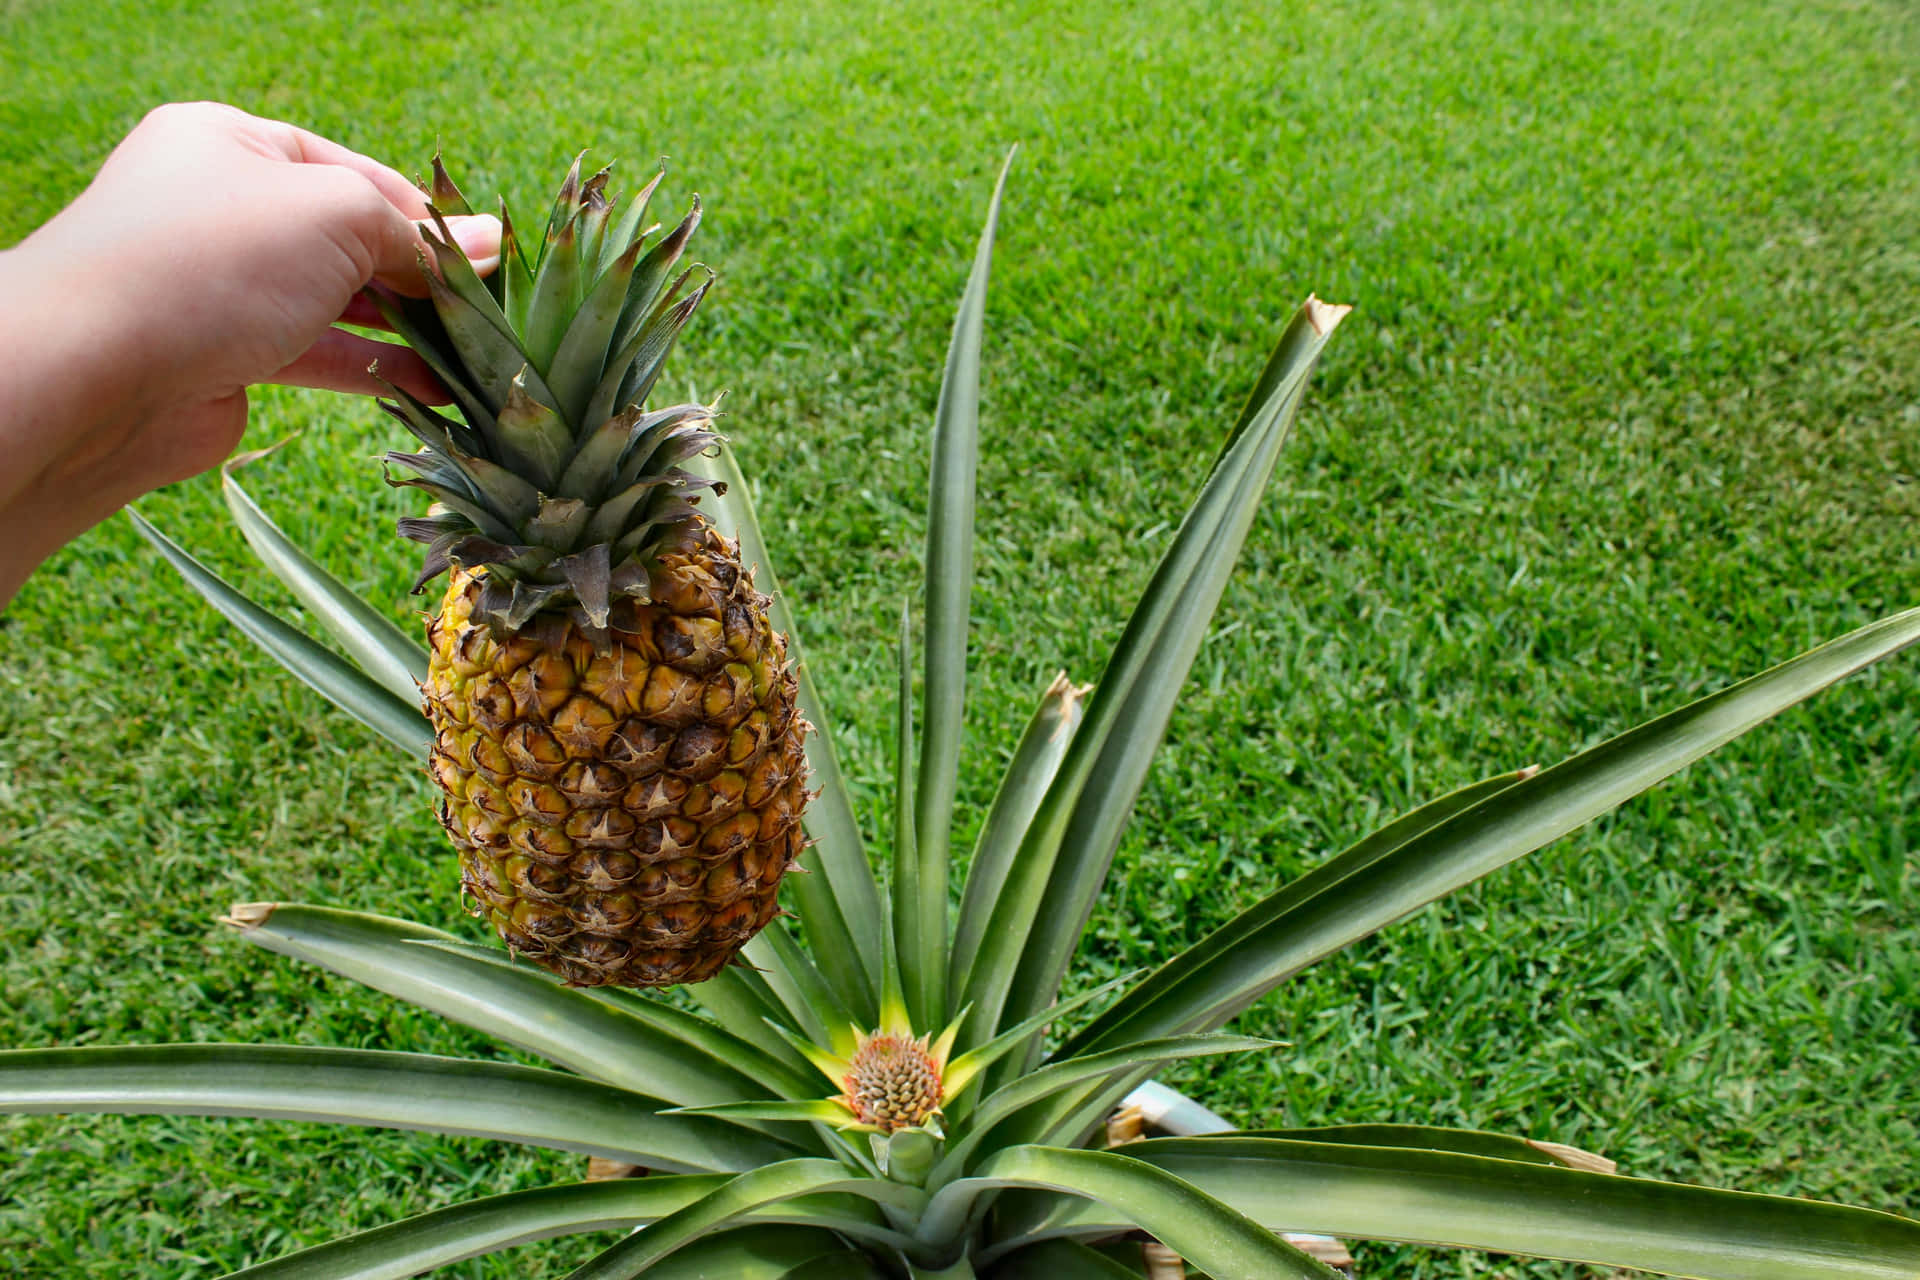 Perfectly ripe pineapple ready to be enjoyed.